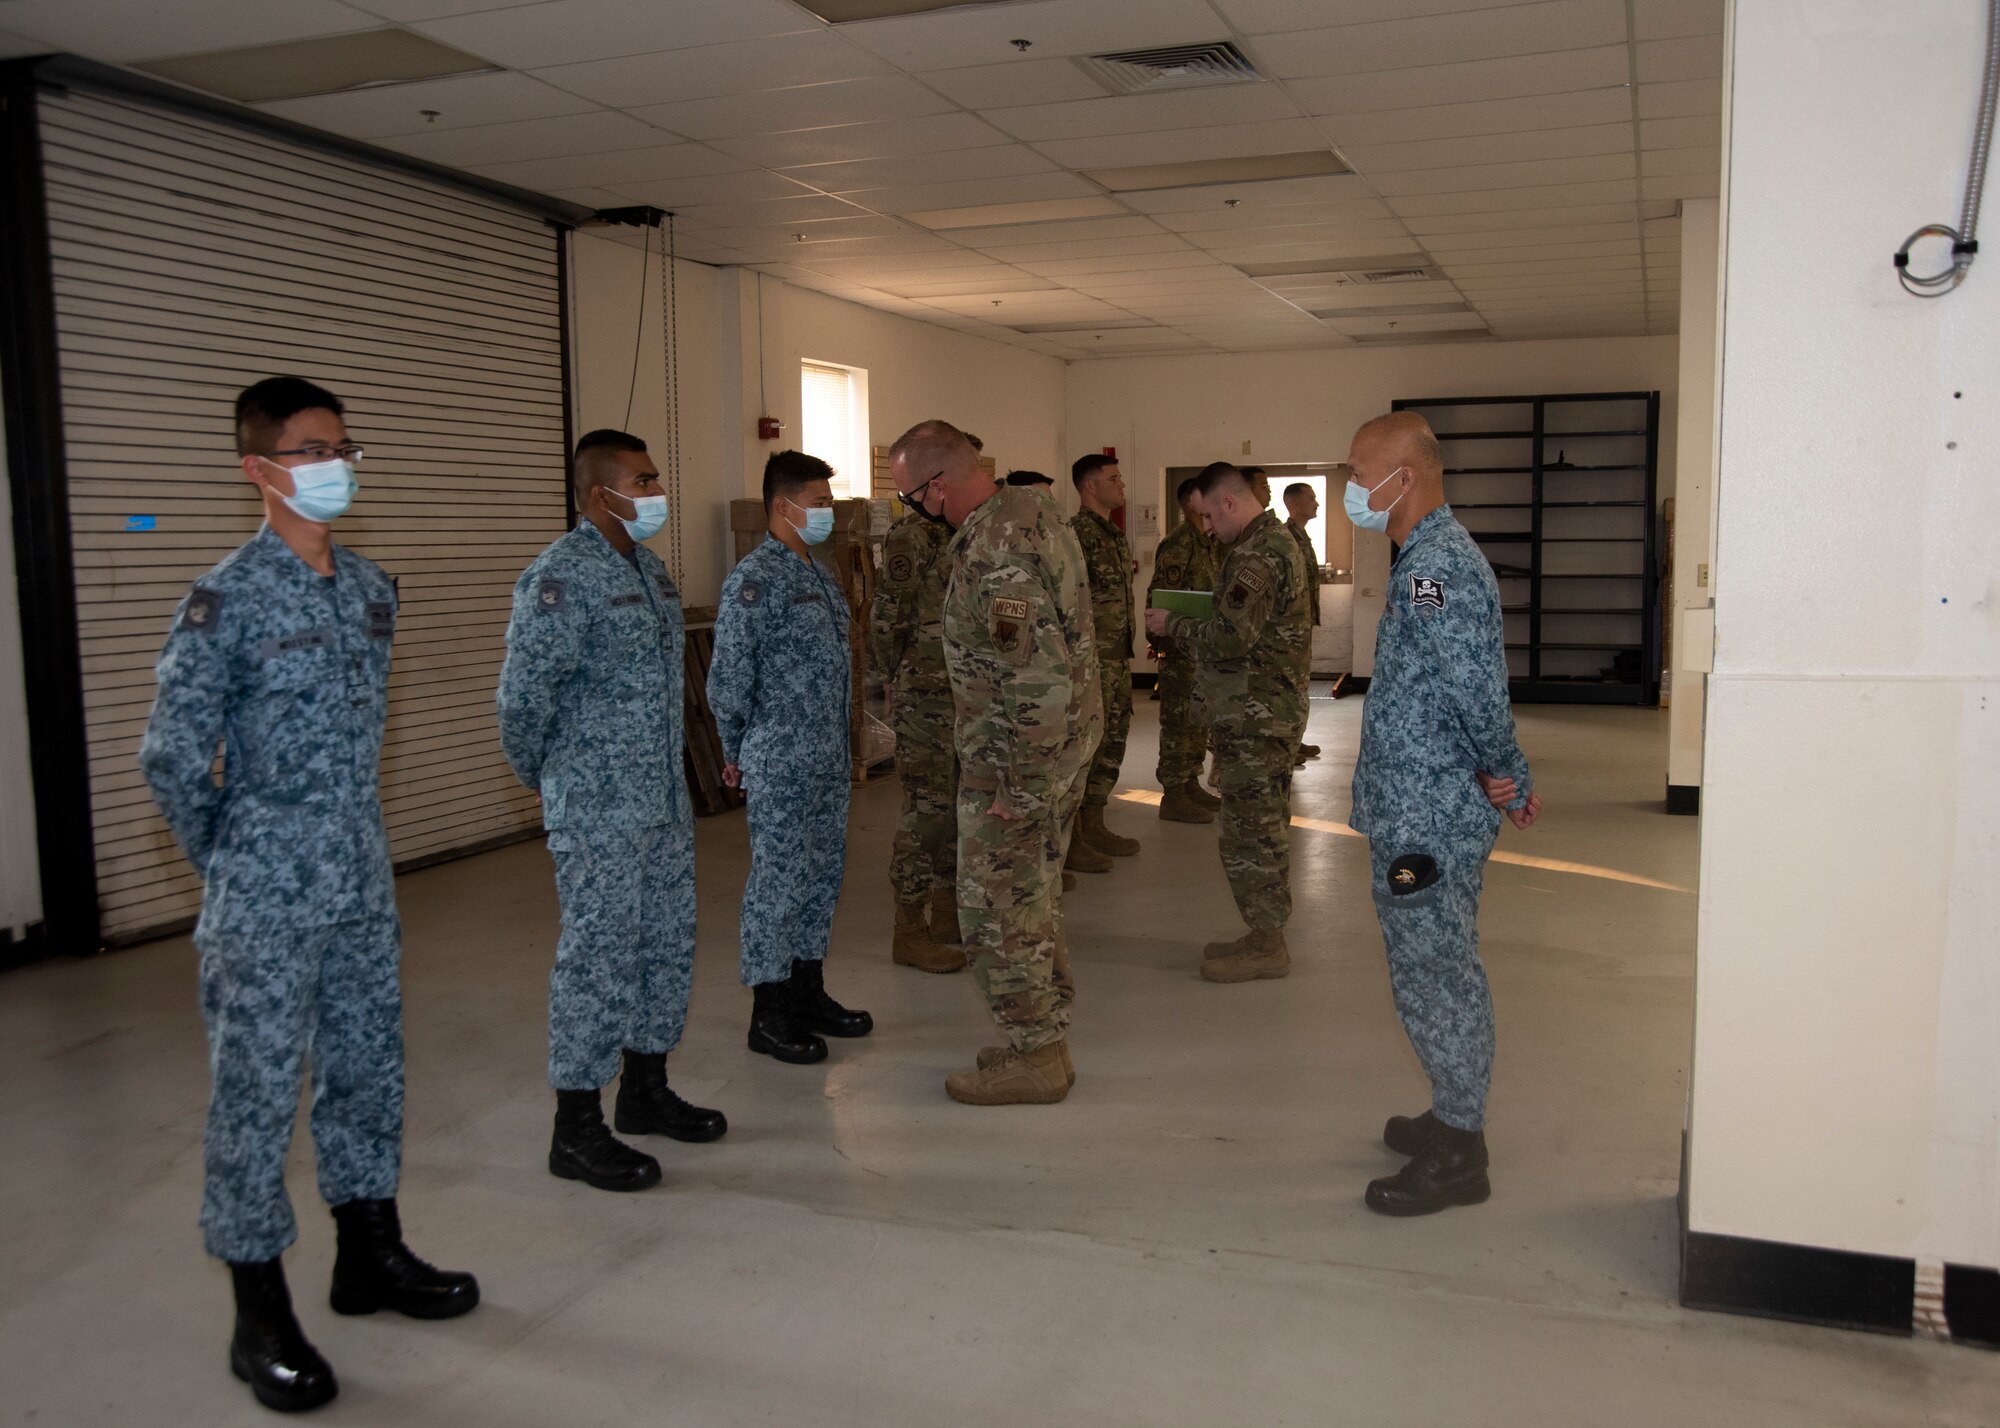 The Airmen from the United States Air Force and the Republic of Singapore Airmen get their uniforms inspected before the Quarterly Load Crew Competition begins.